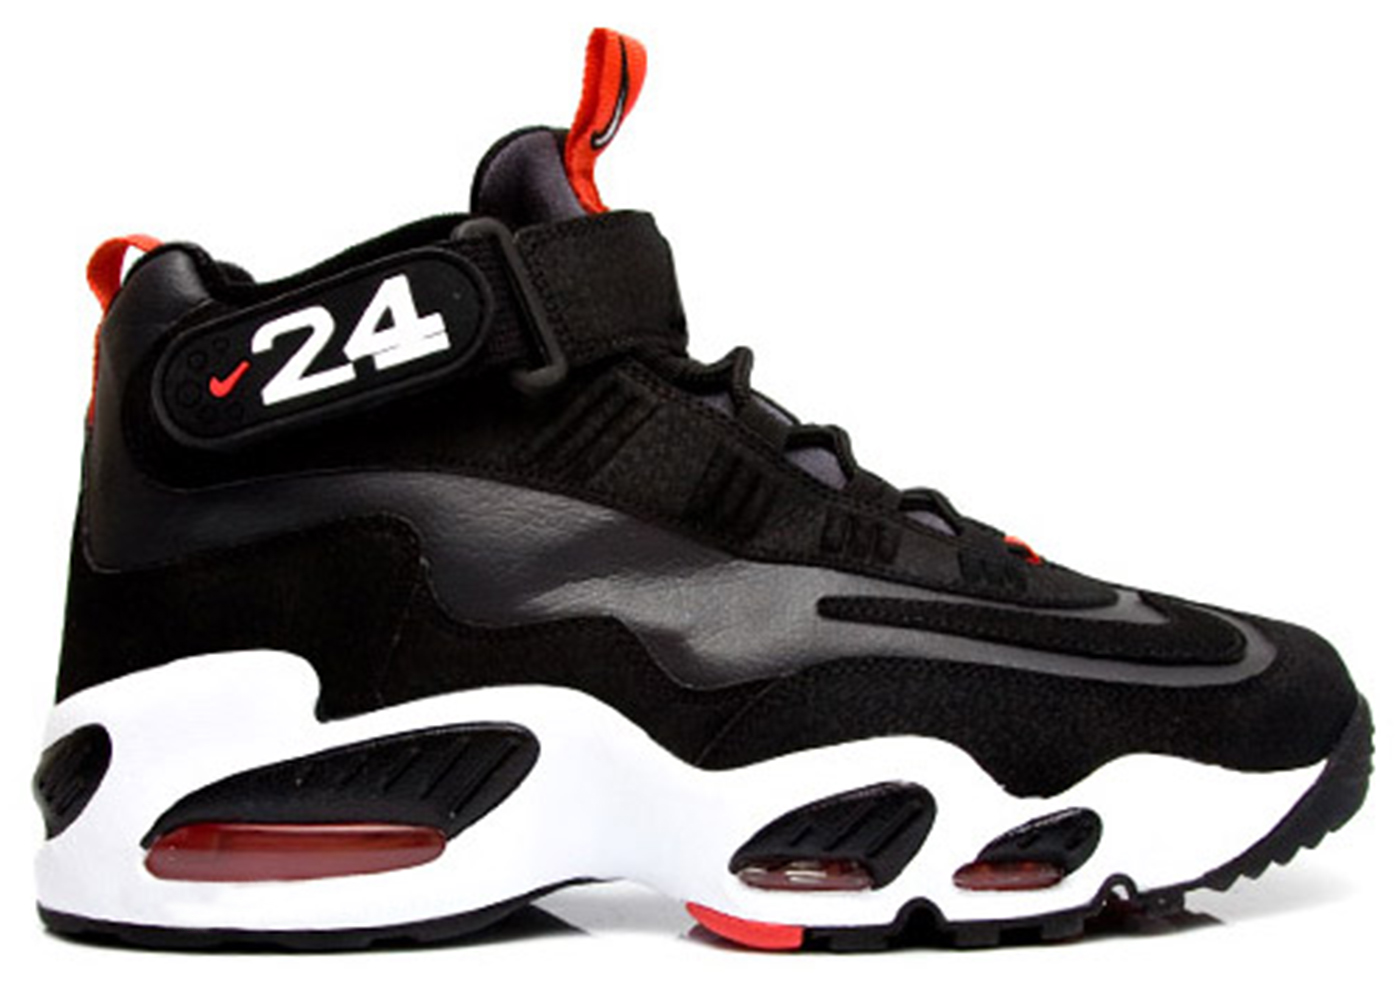 Nike Air Griffey Max 1 Anthracite Hot Red Men's - 354912-002 - US